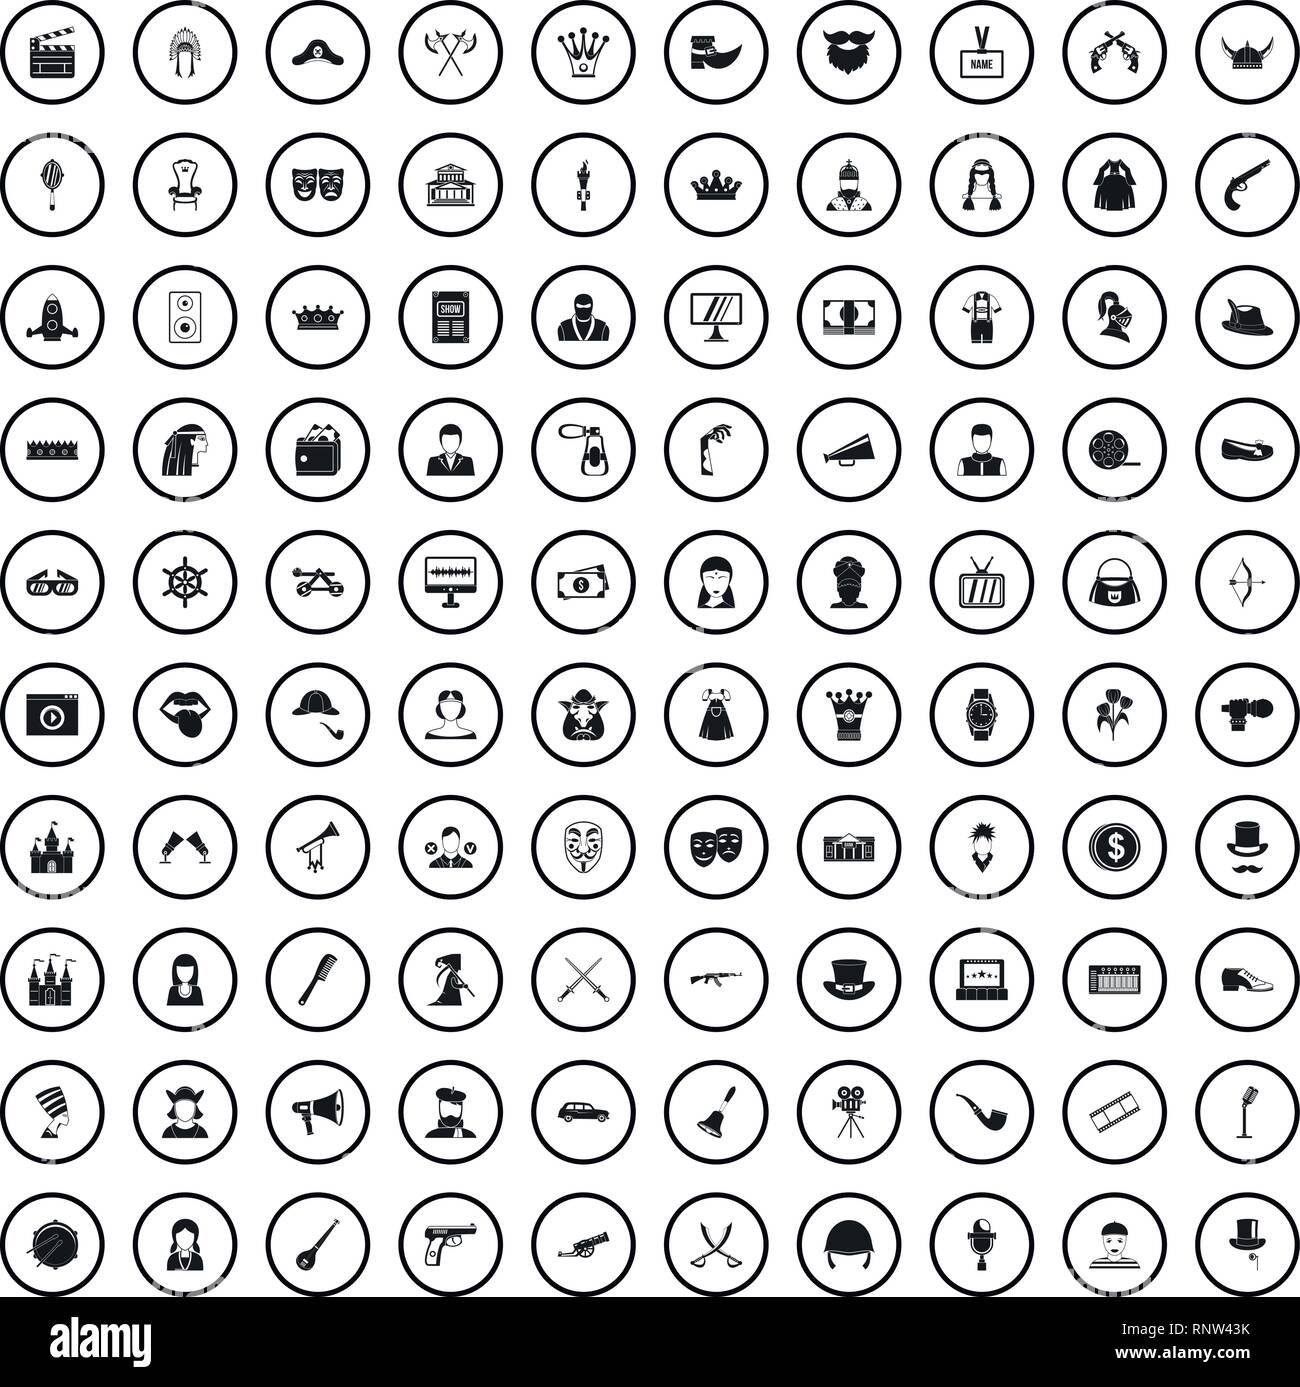 100 cinema actor icons set, simple style  Stock Vector